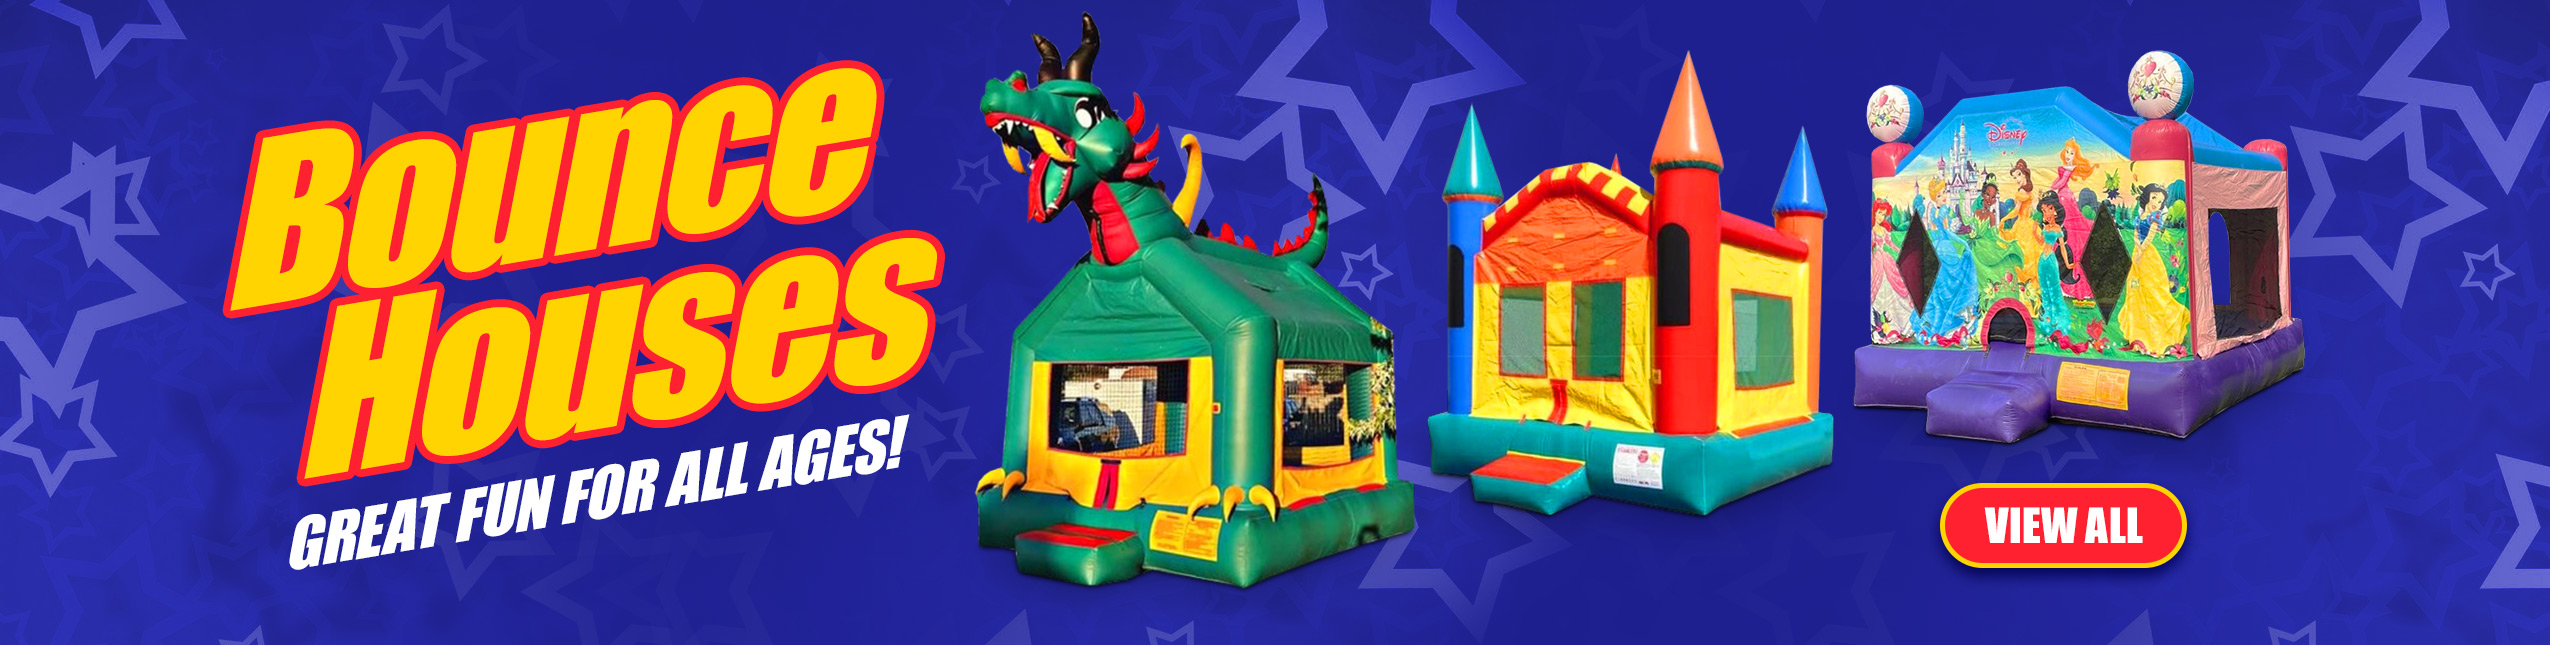 Weatherford TX Bounce Houses